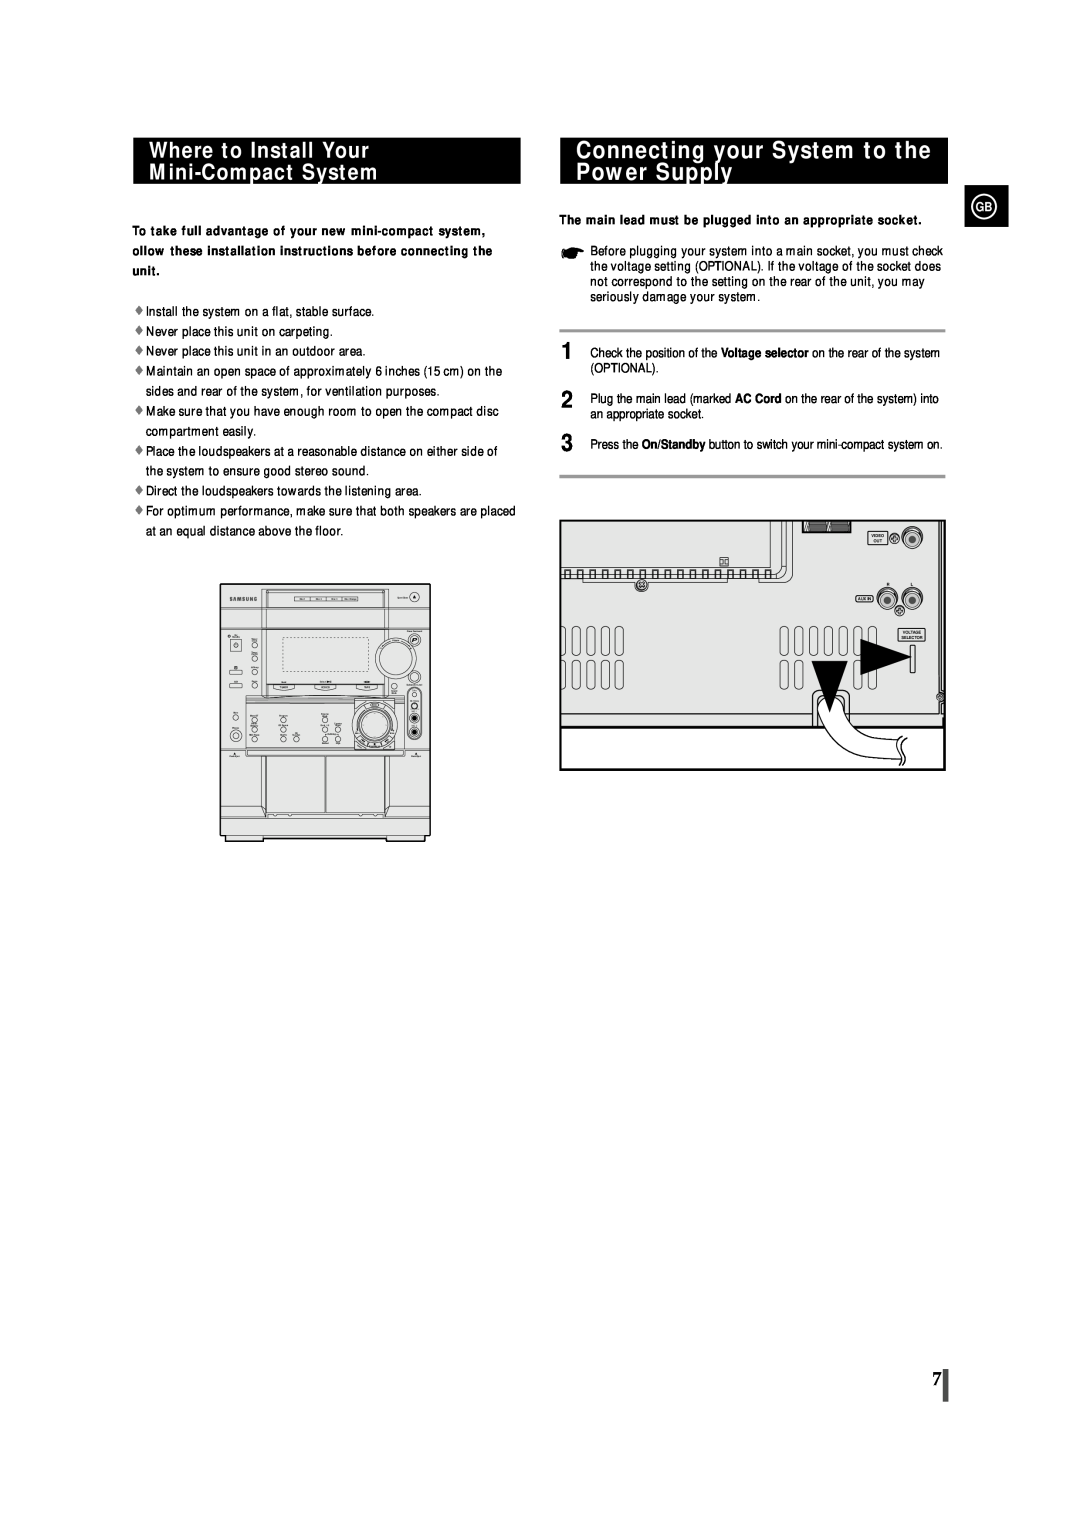 Samsung MAX-VL85 instruction manual Connecting your System to the Power Supply, Where to Install Your Mini-CompactSystem 